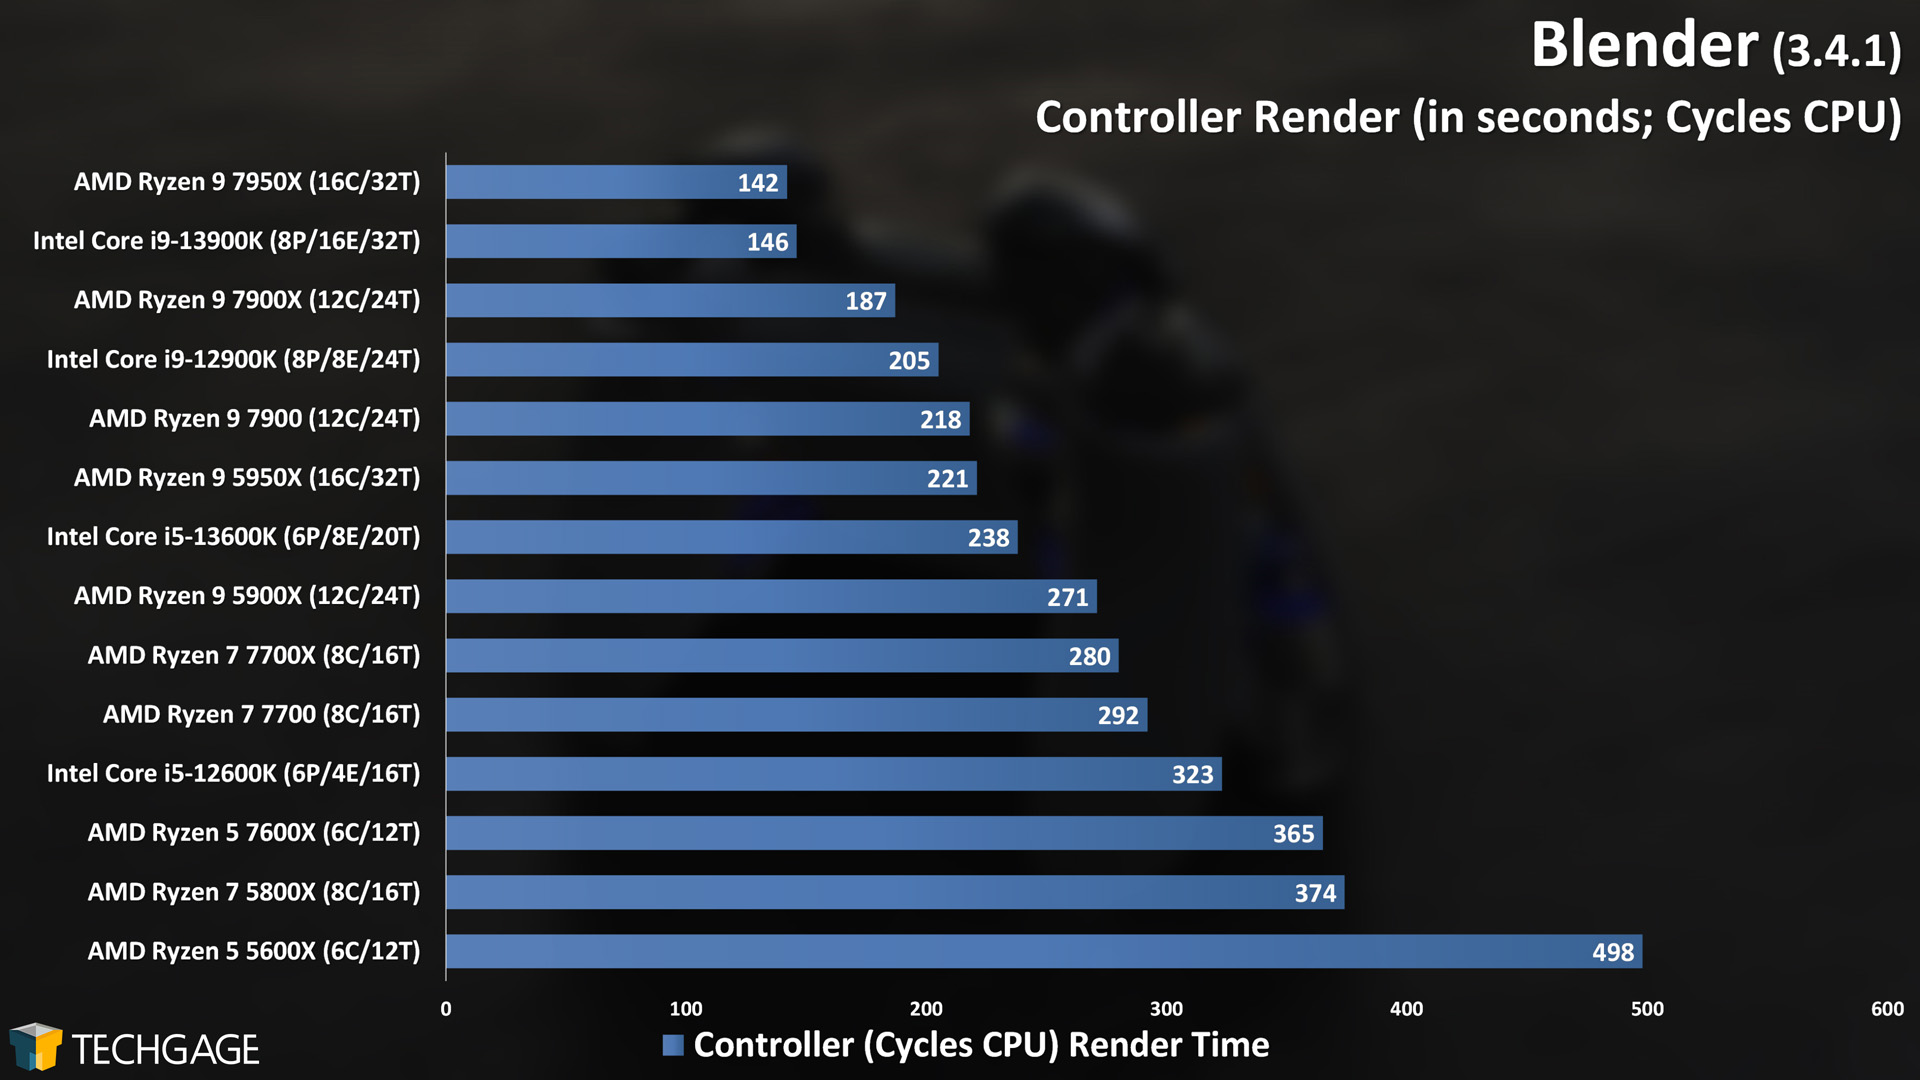 Blender - Cycles CPU Rendering Performance (Controller)